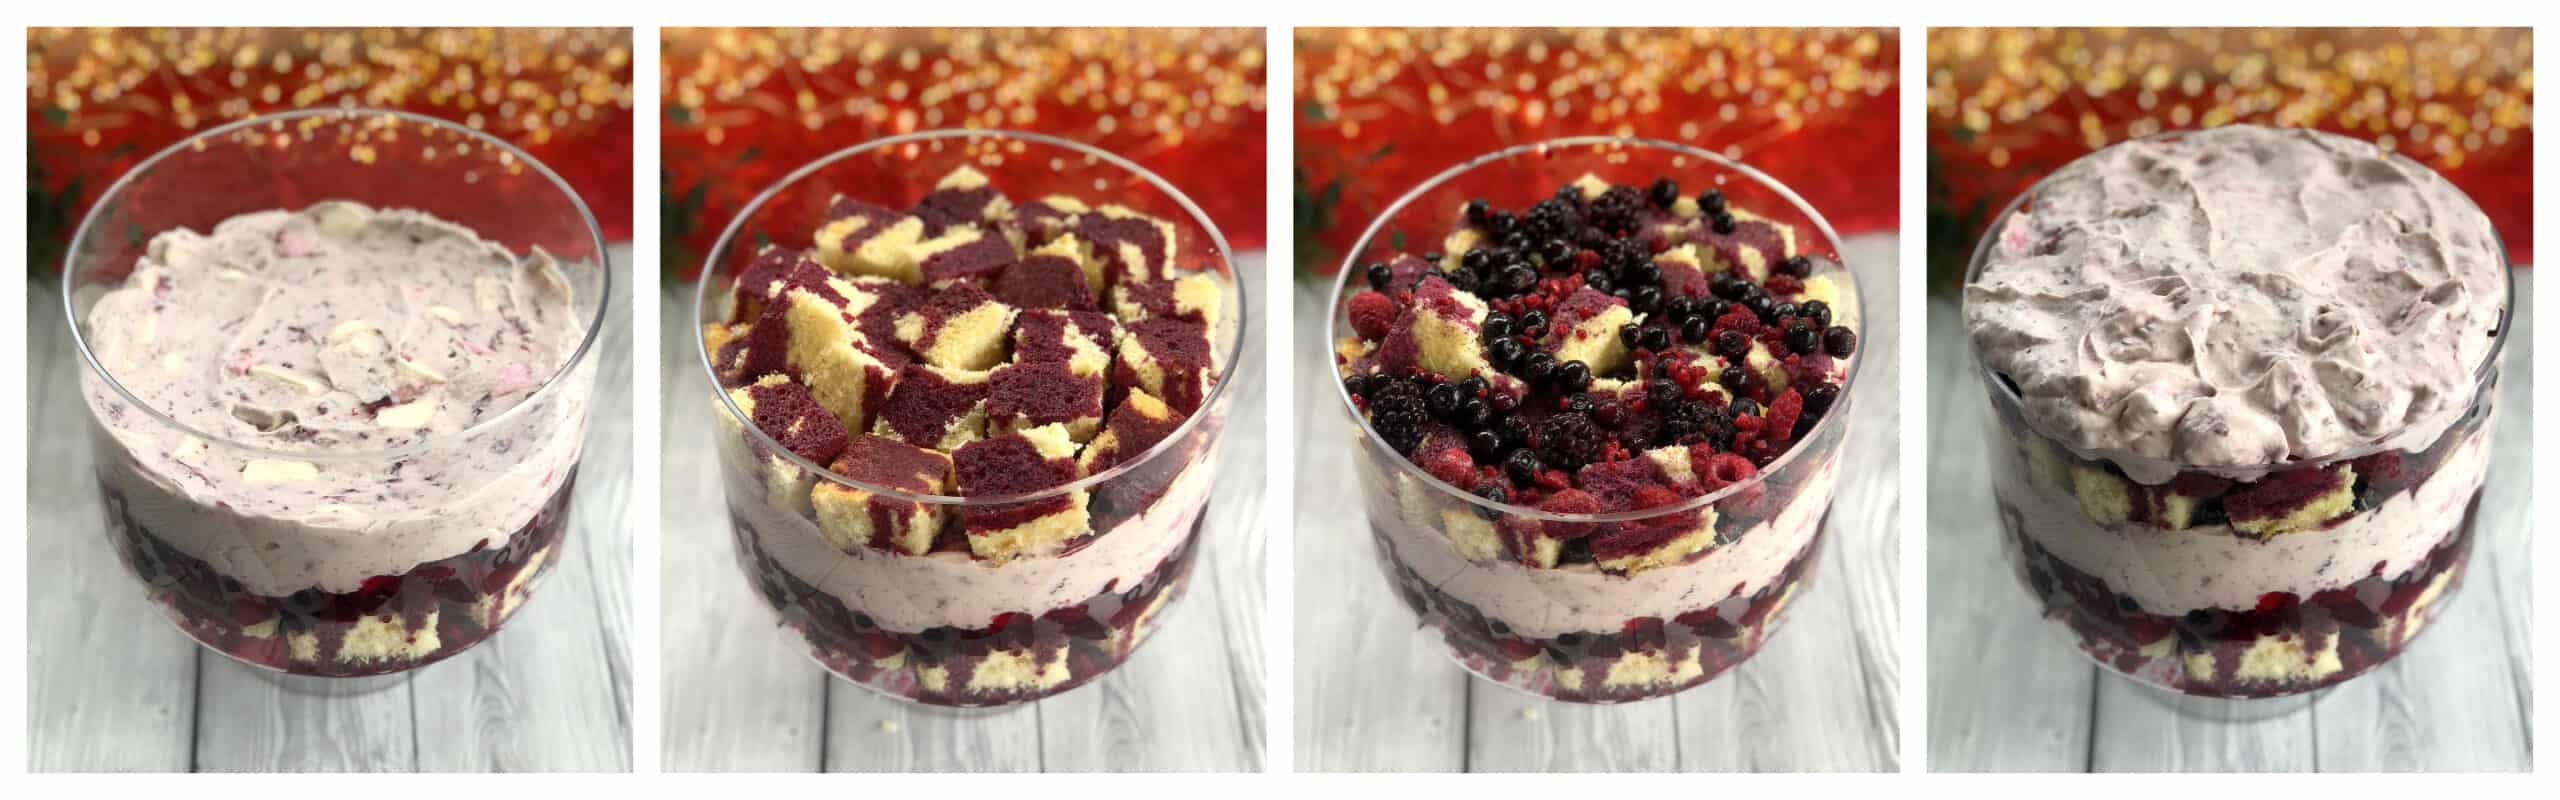 Step by step how to prepare a trifle 